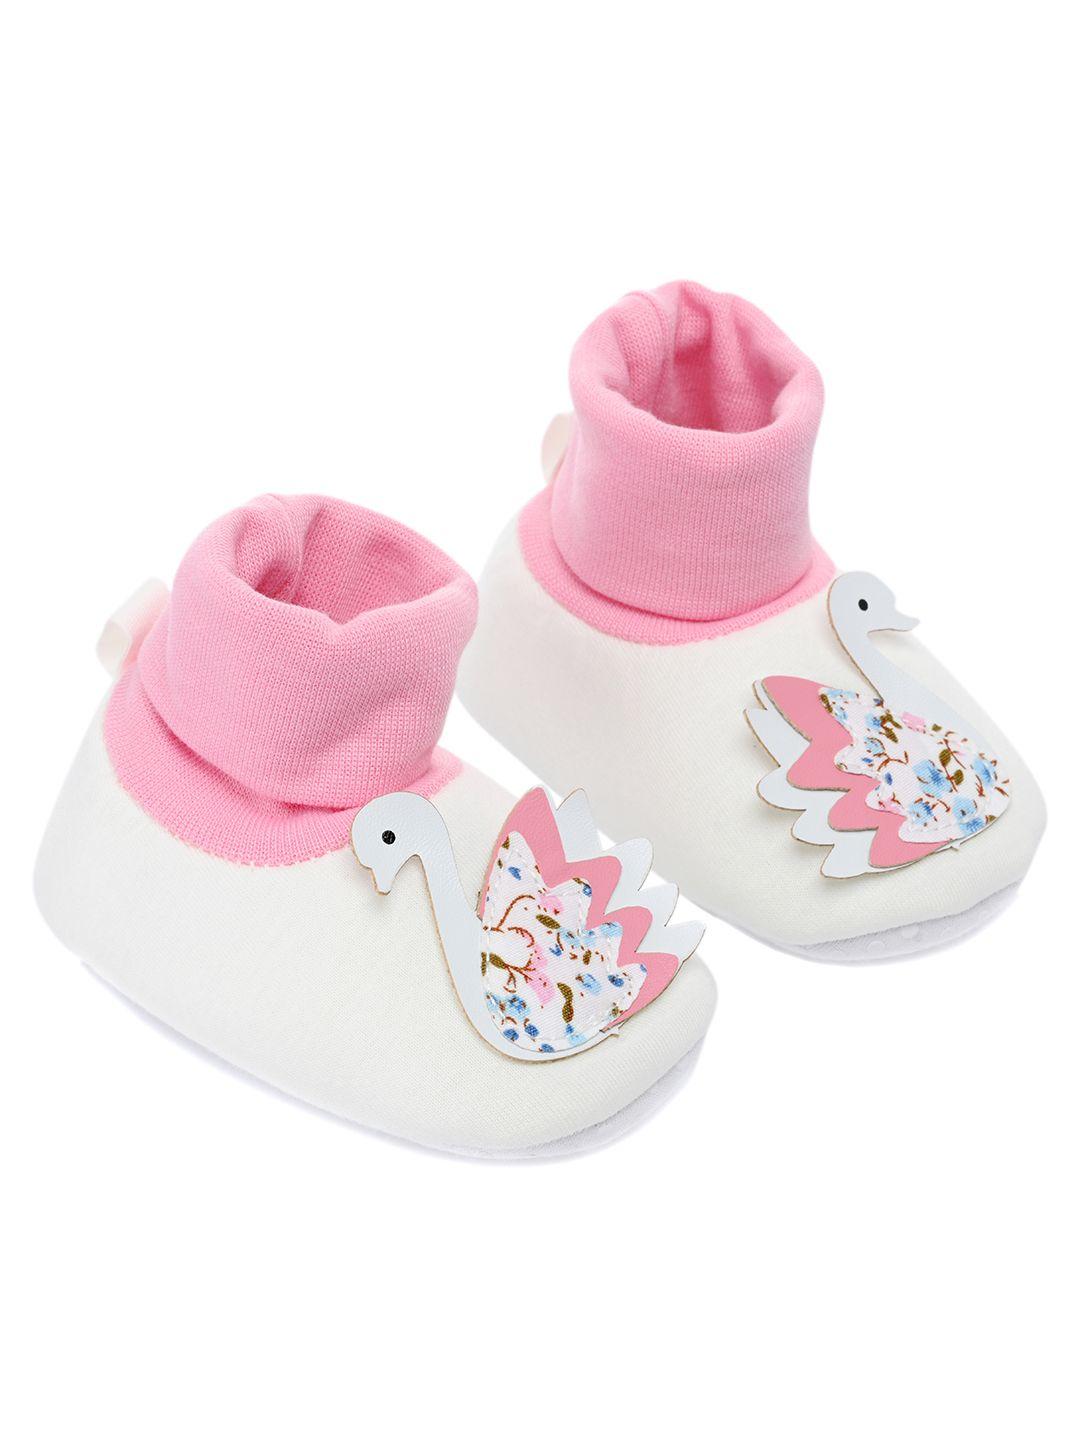 mothercare girls swan embellished padded booties